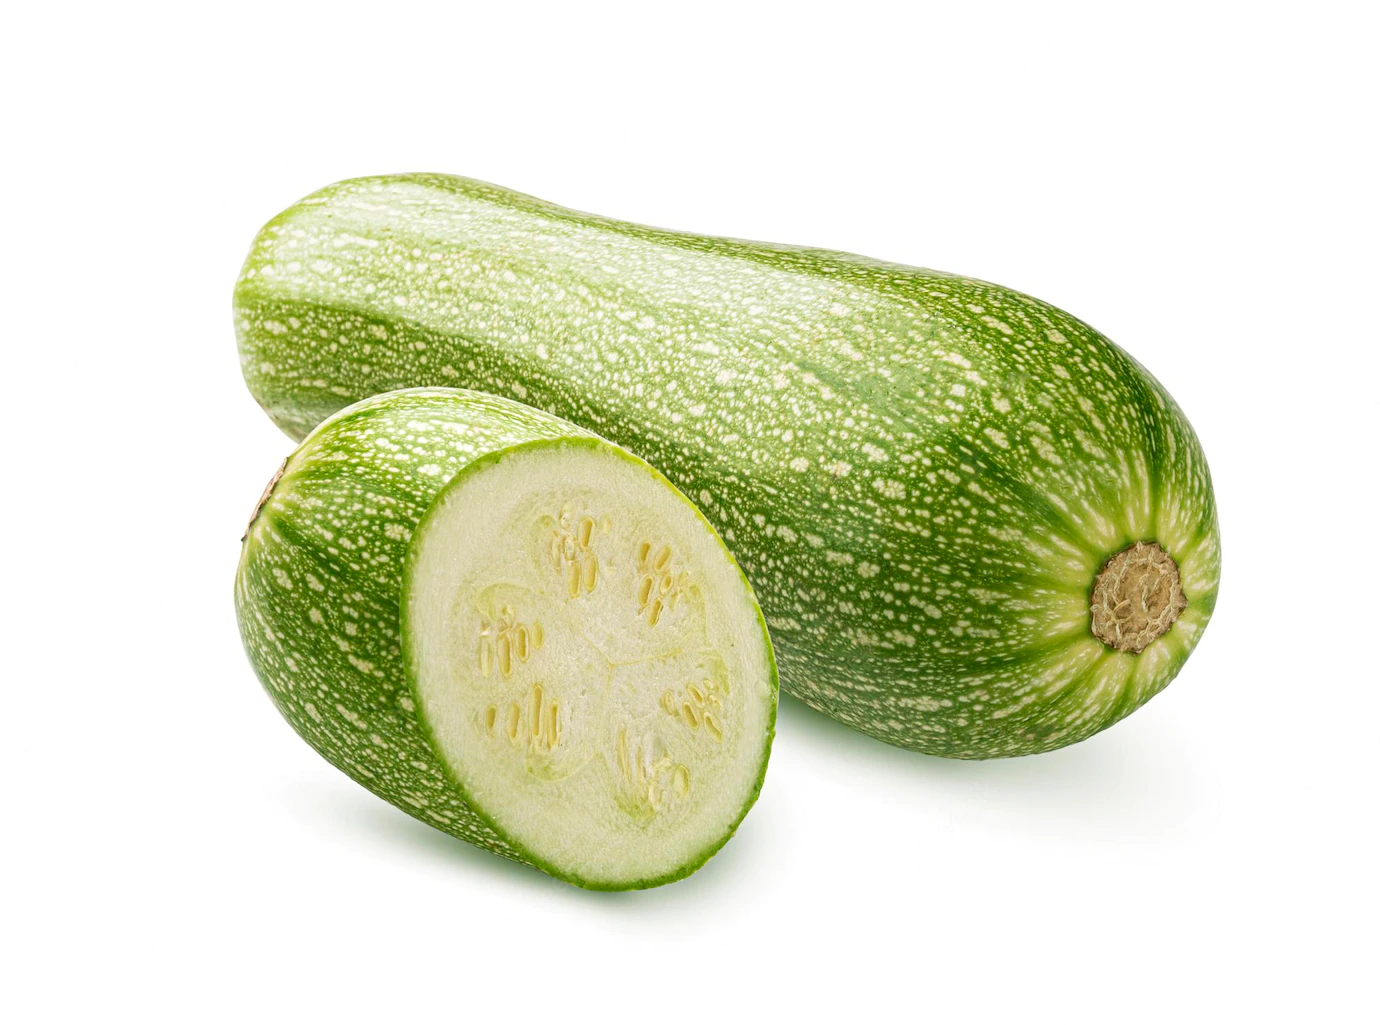 green-zucchini-with-slice-isolated-white-background_88281-5462